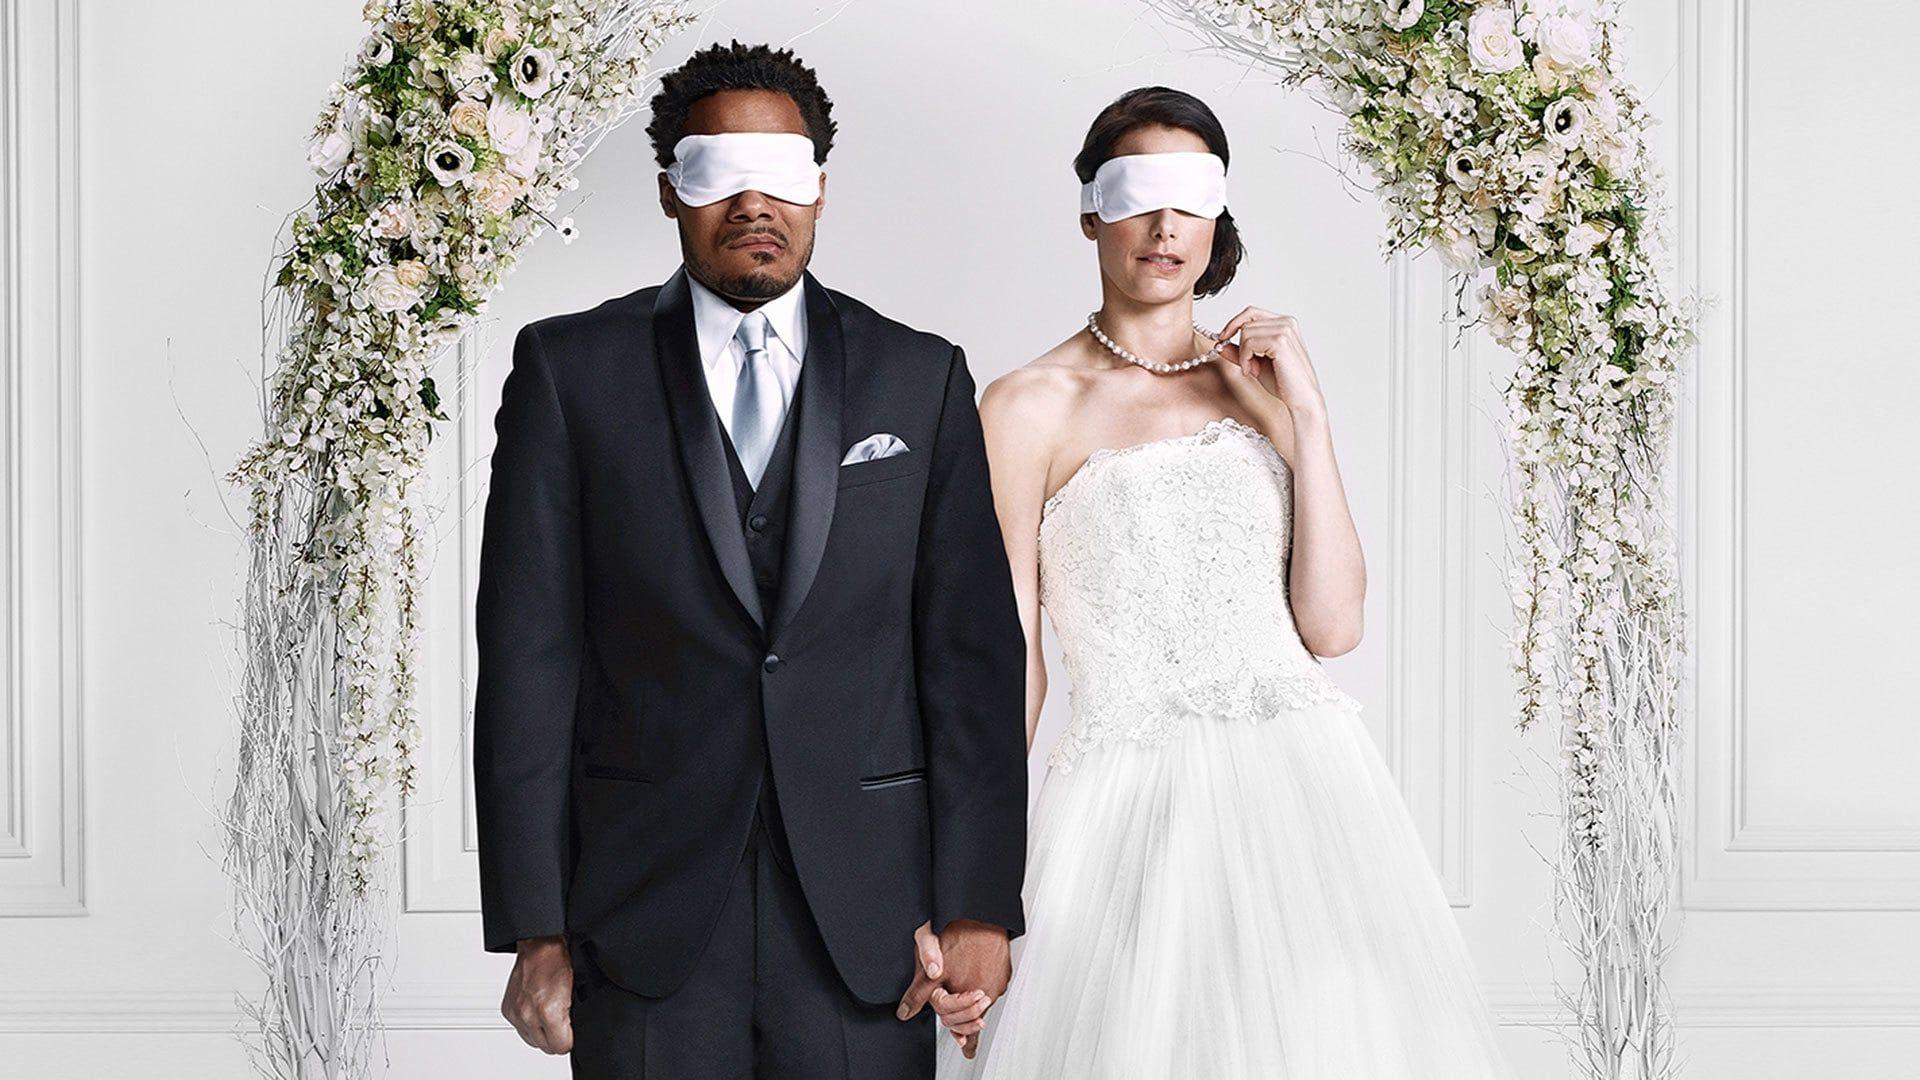 Married at First Sight (TV Series 2014- )